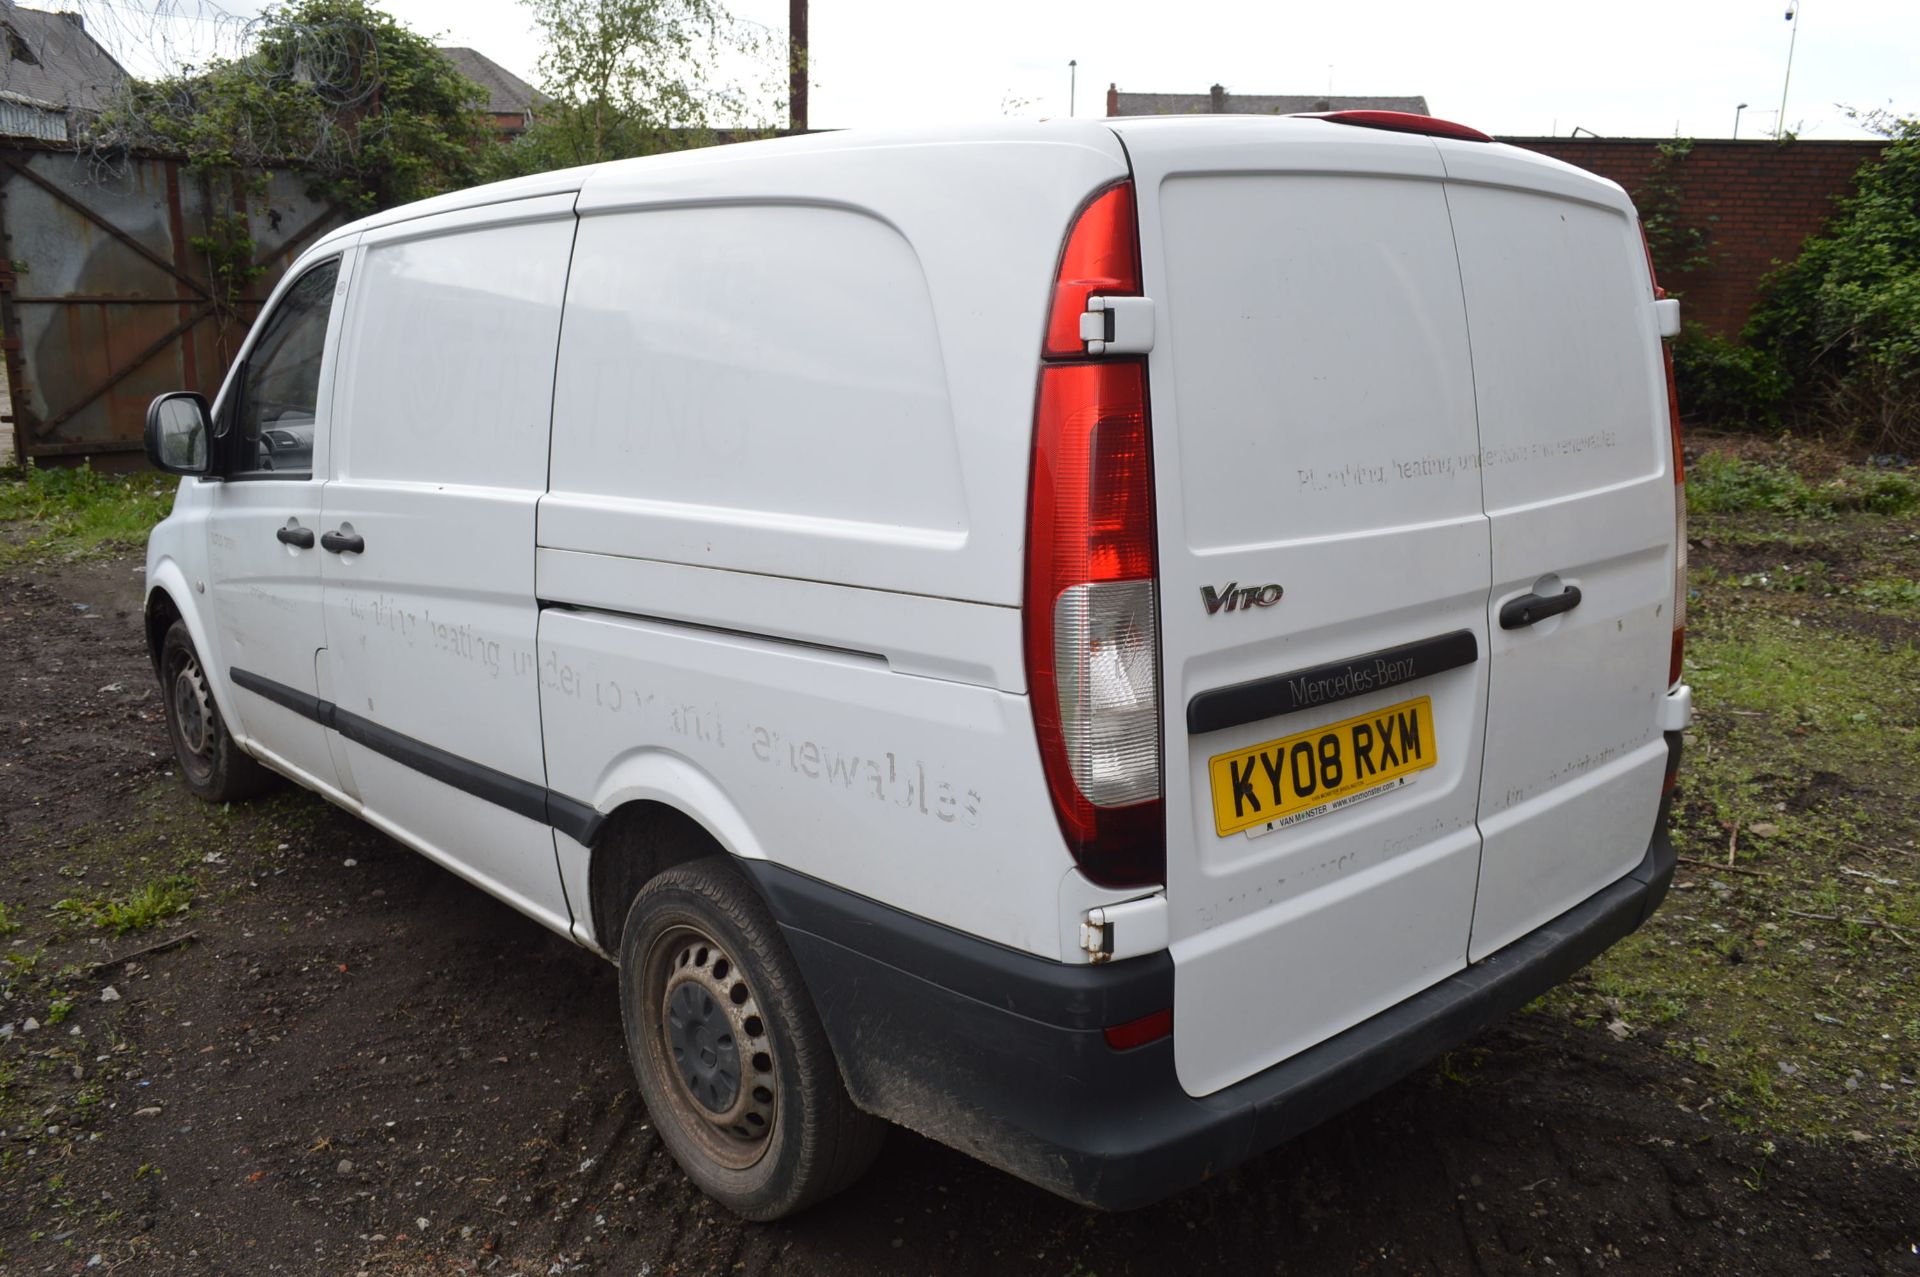 Mercedes VITO 109CDI LONG DIESEL PANEL VAN, registration no. KY08 RXM, date first registered 06/03/ - Image 4 of 7